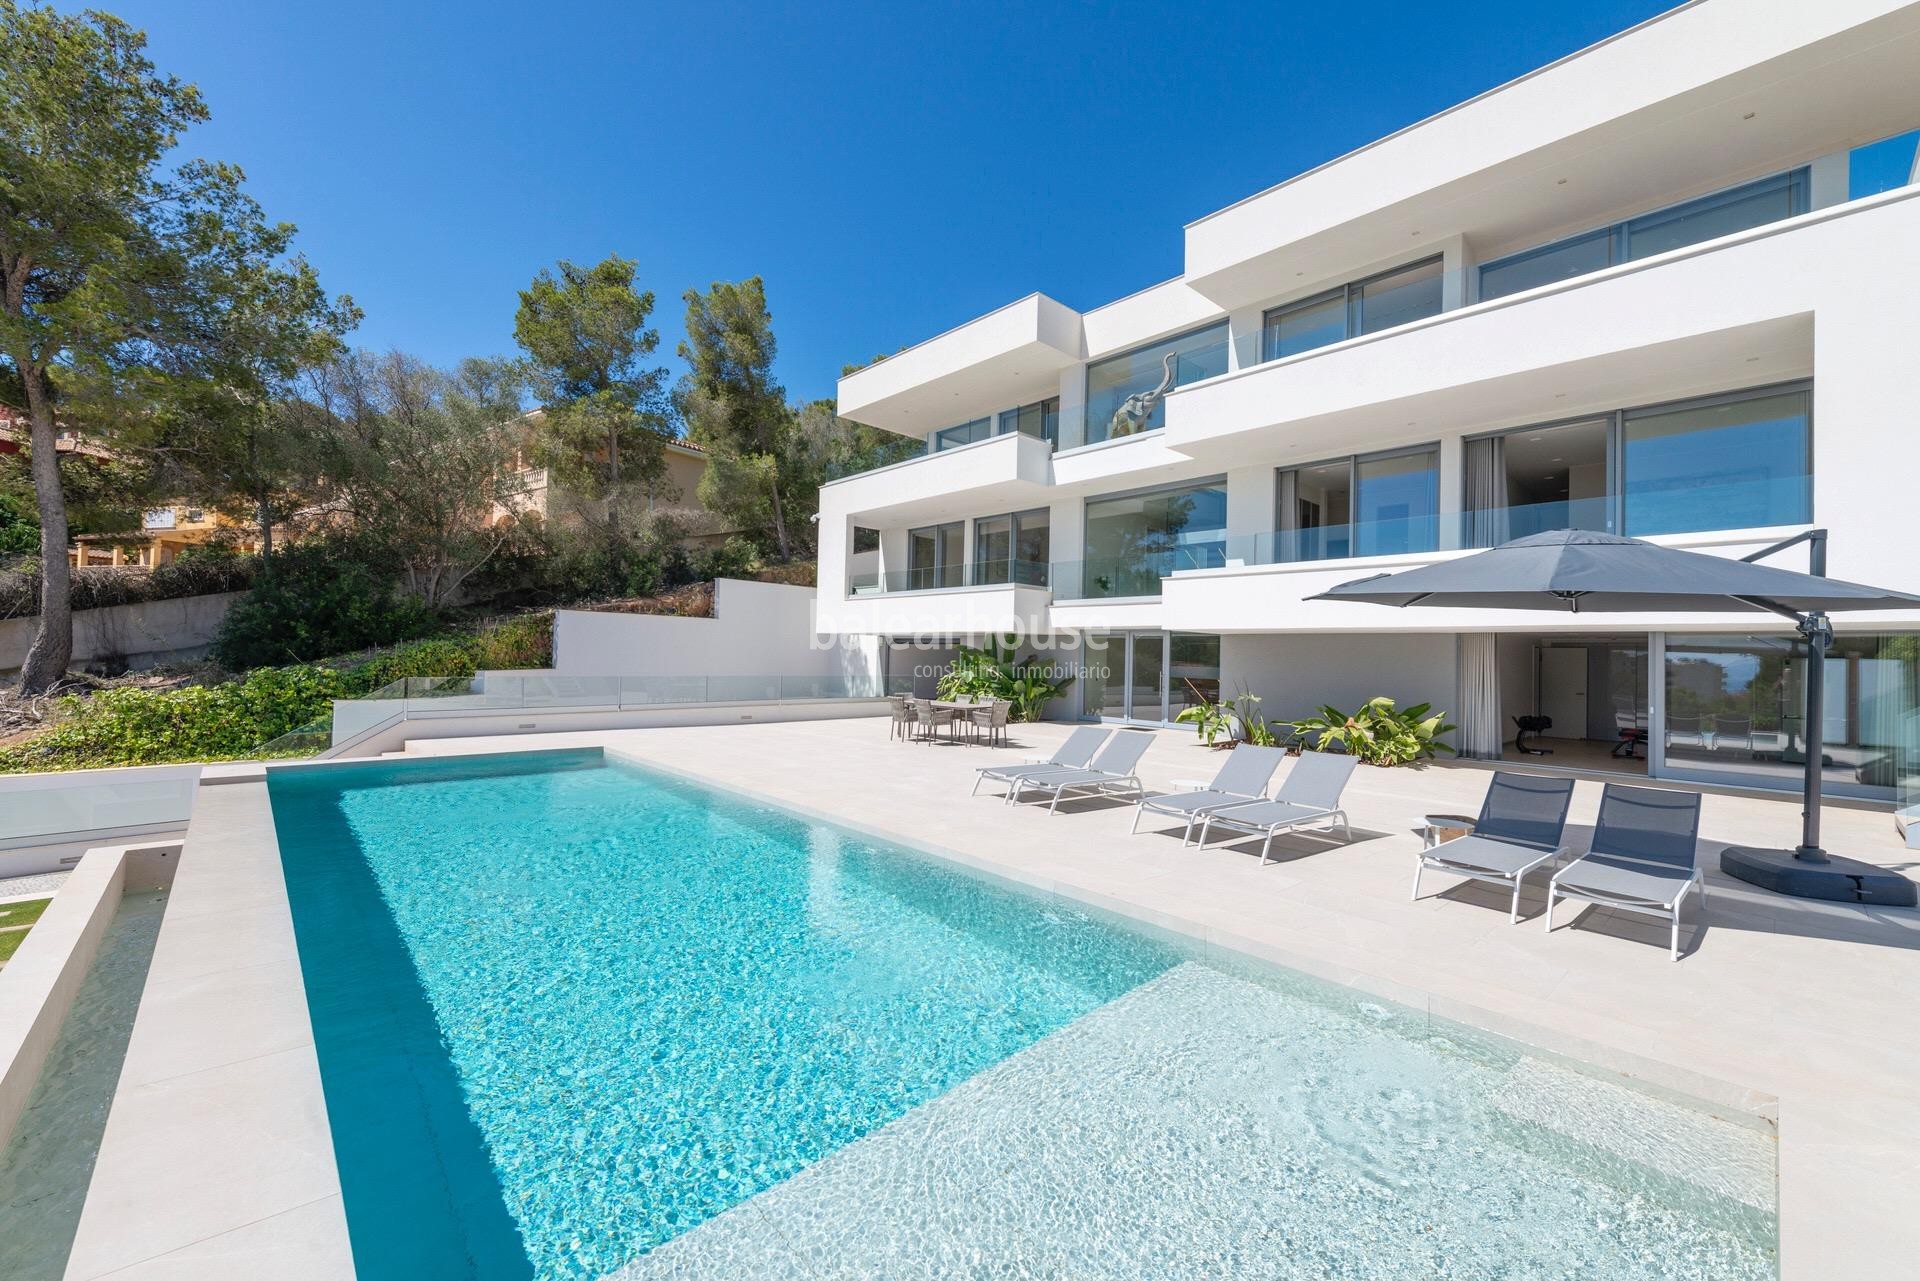 Magnificent new villa with sea views in Palmanova, with a Moderna design, terraces and gardens